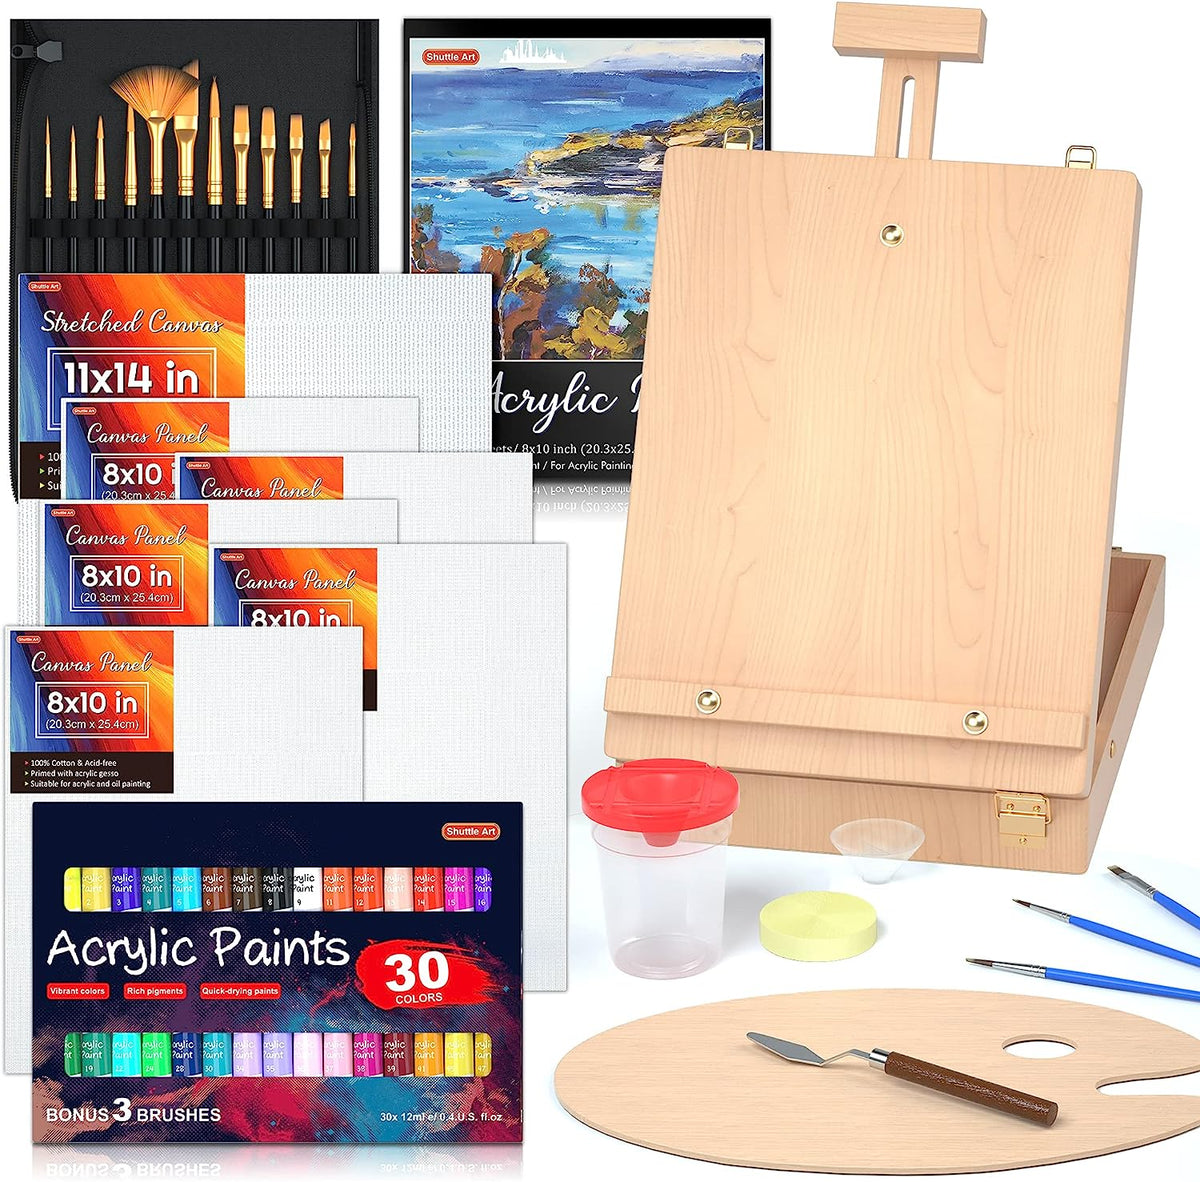 66 Pack Acrylic Paint Set, Shuttle Art Acrylic Painting Set with 30 Colors  Acrylic Paint, Wooden Easel, Painting Canvas, Paint Brushes, Palettes, Art